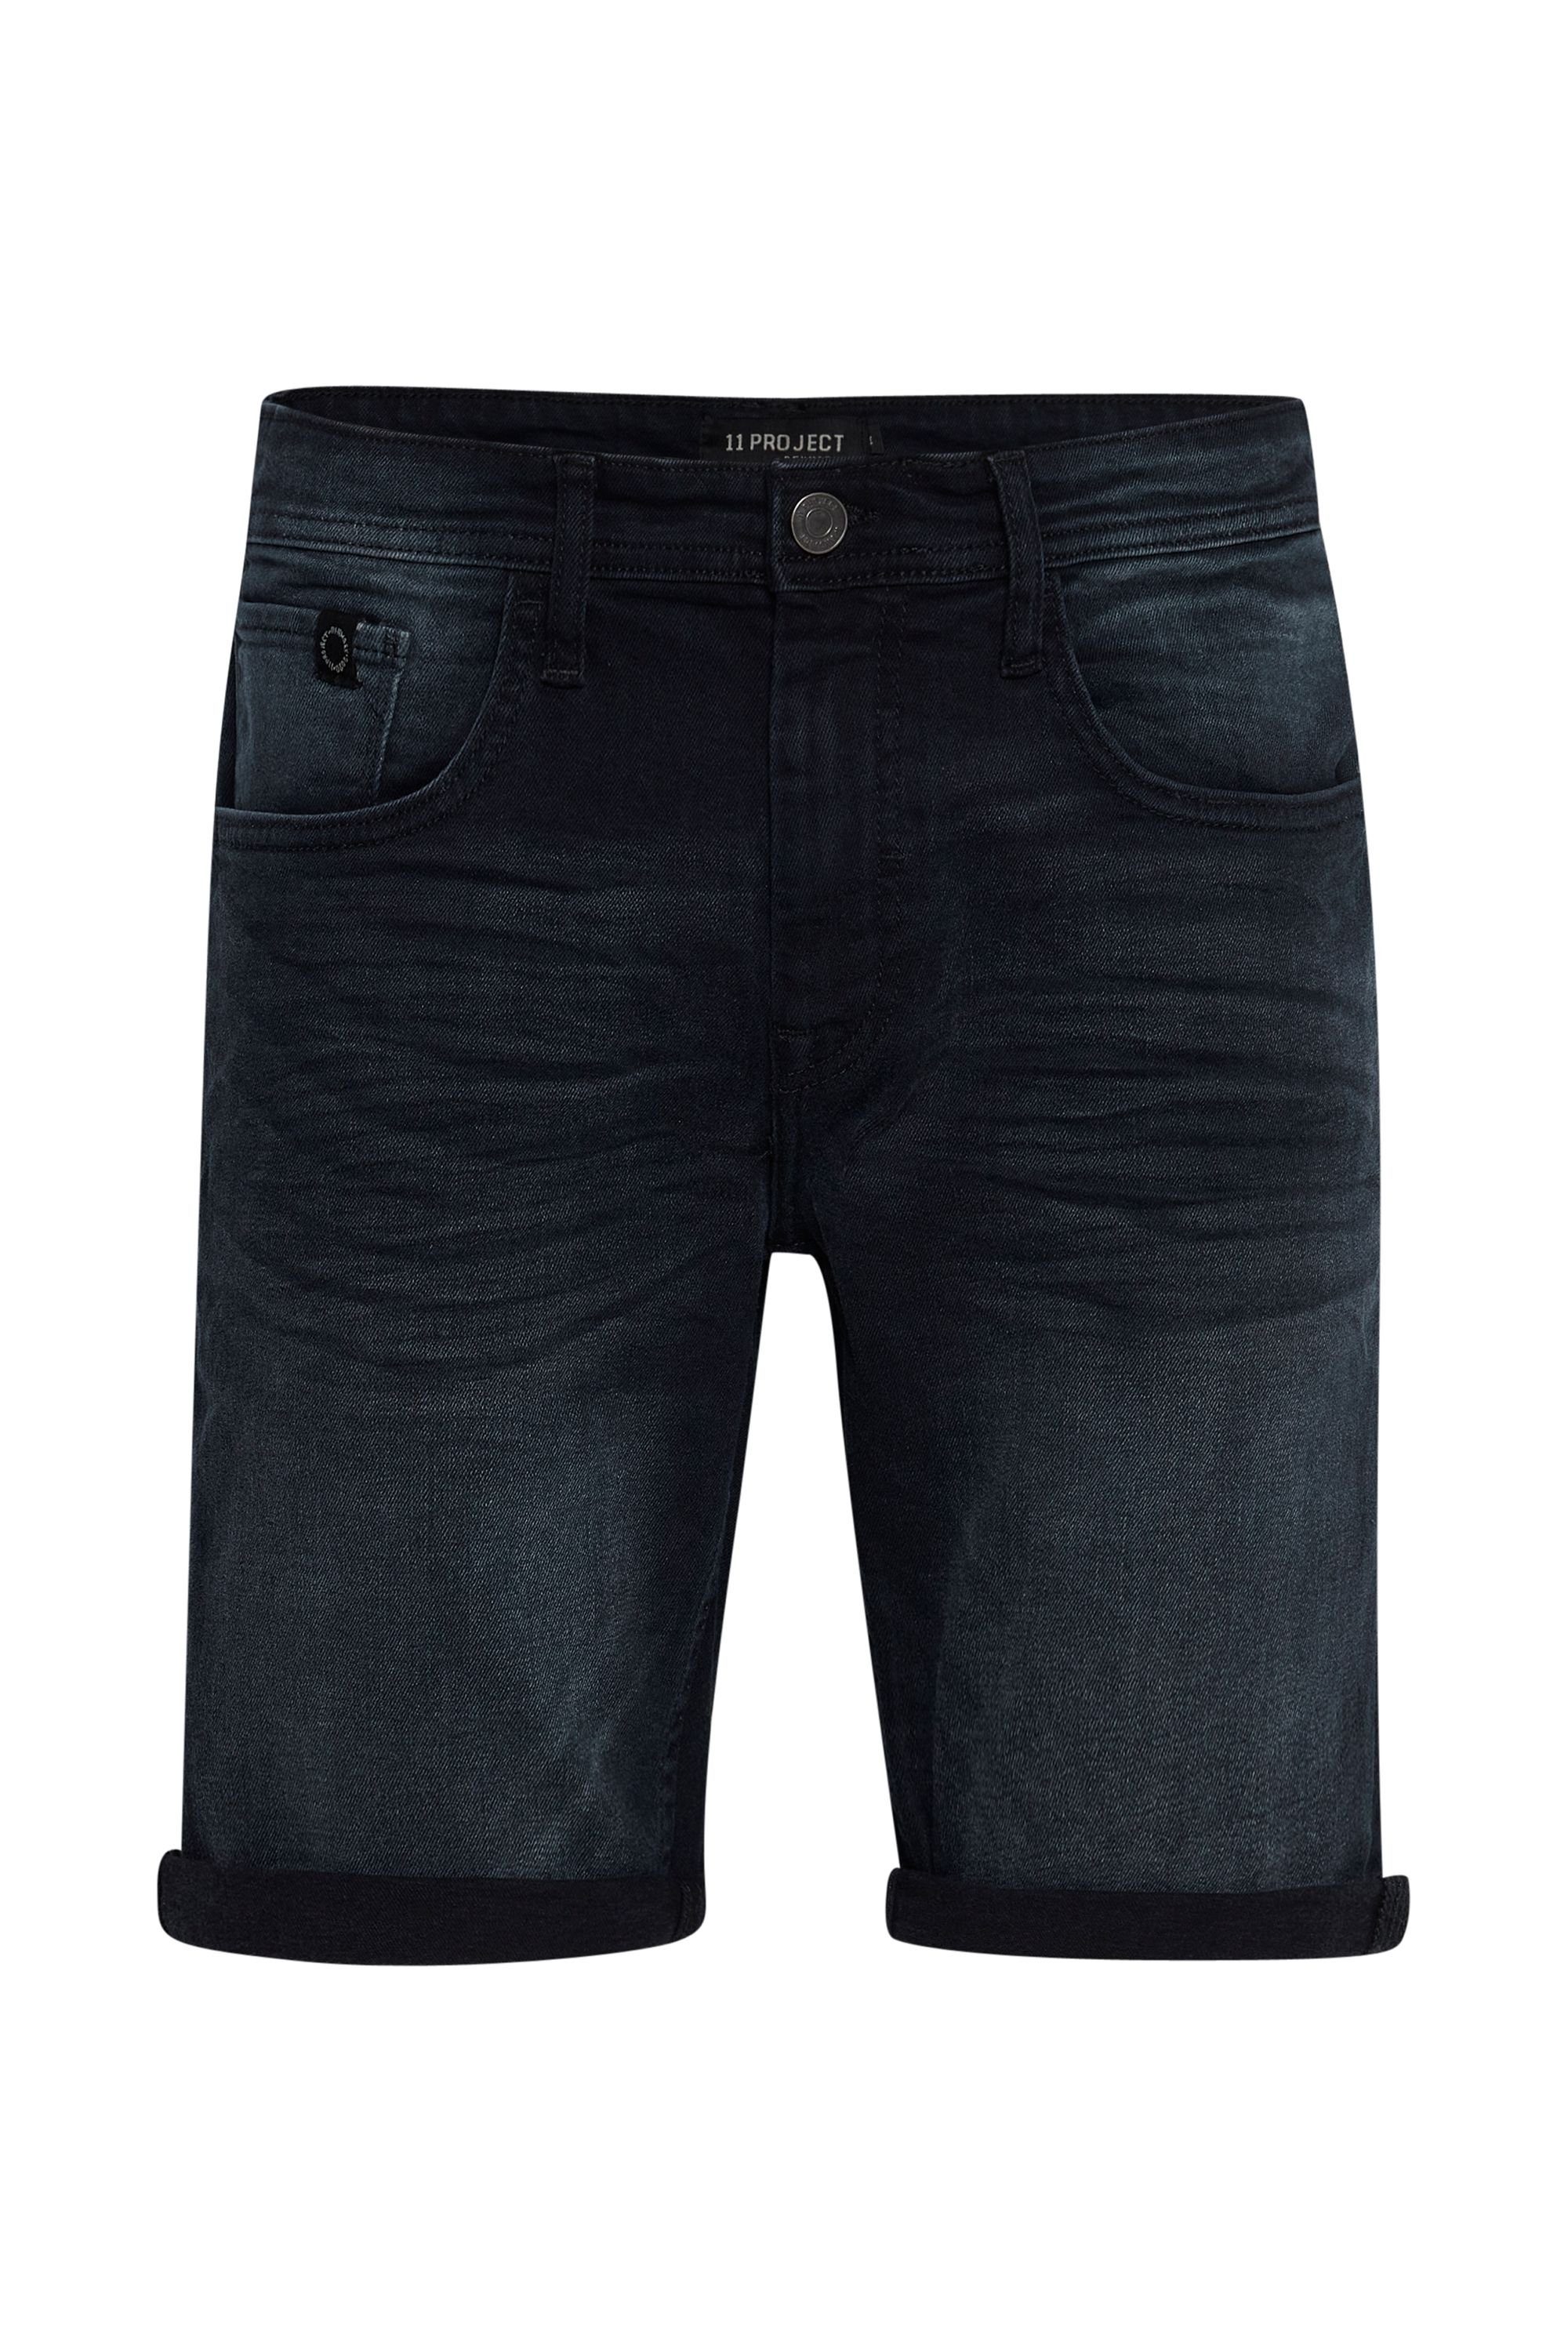 11 Project washed PRNias Jeansshorts Project Denim black 11